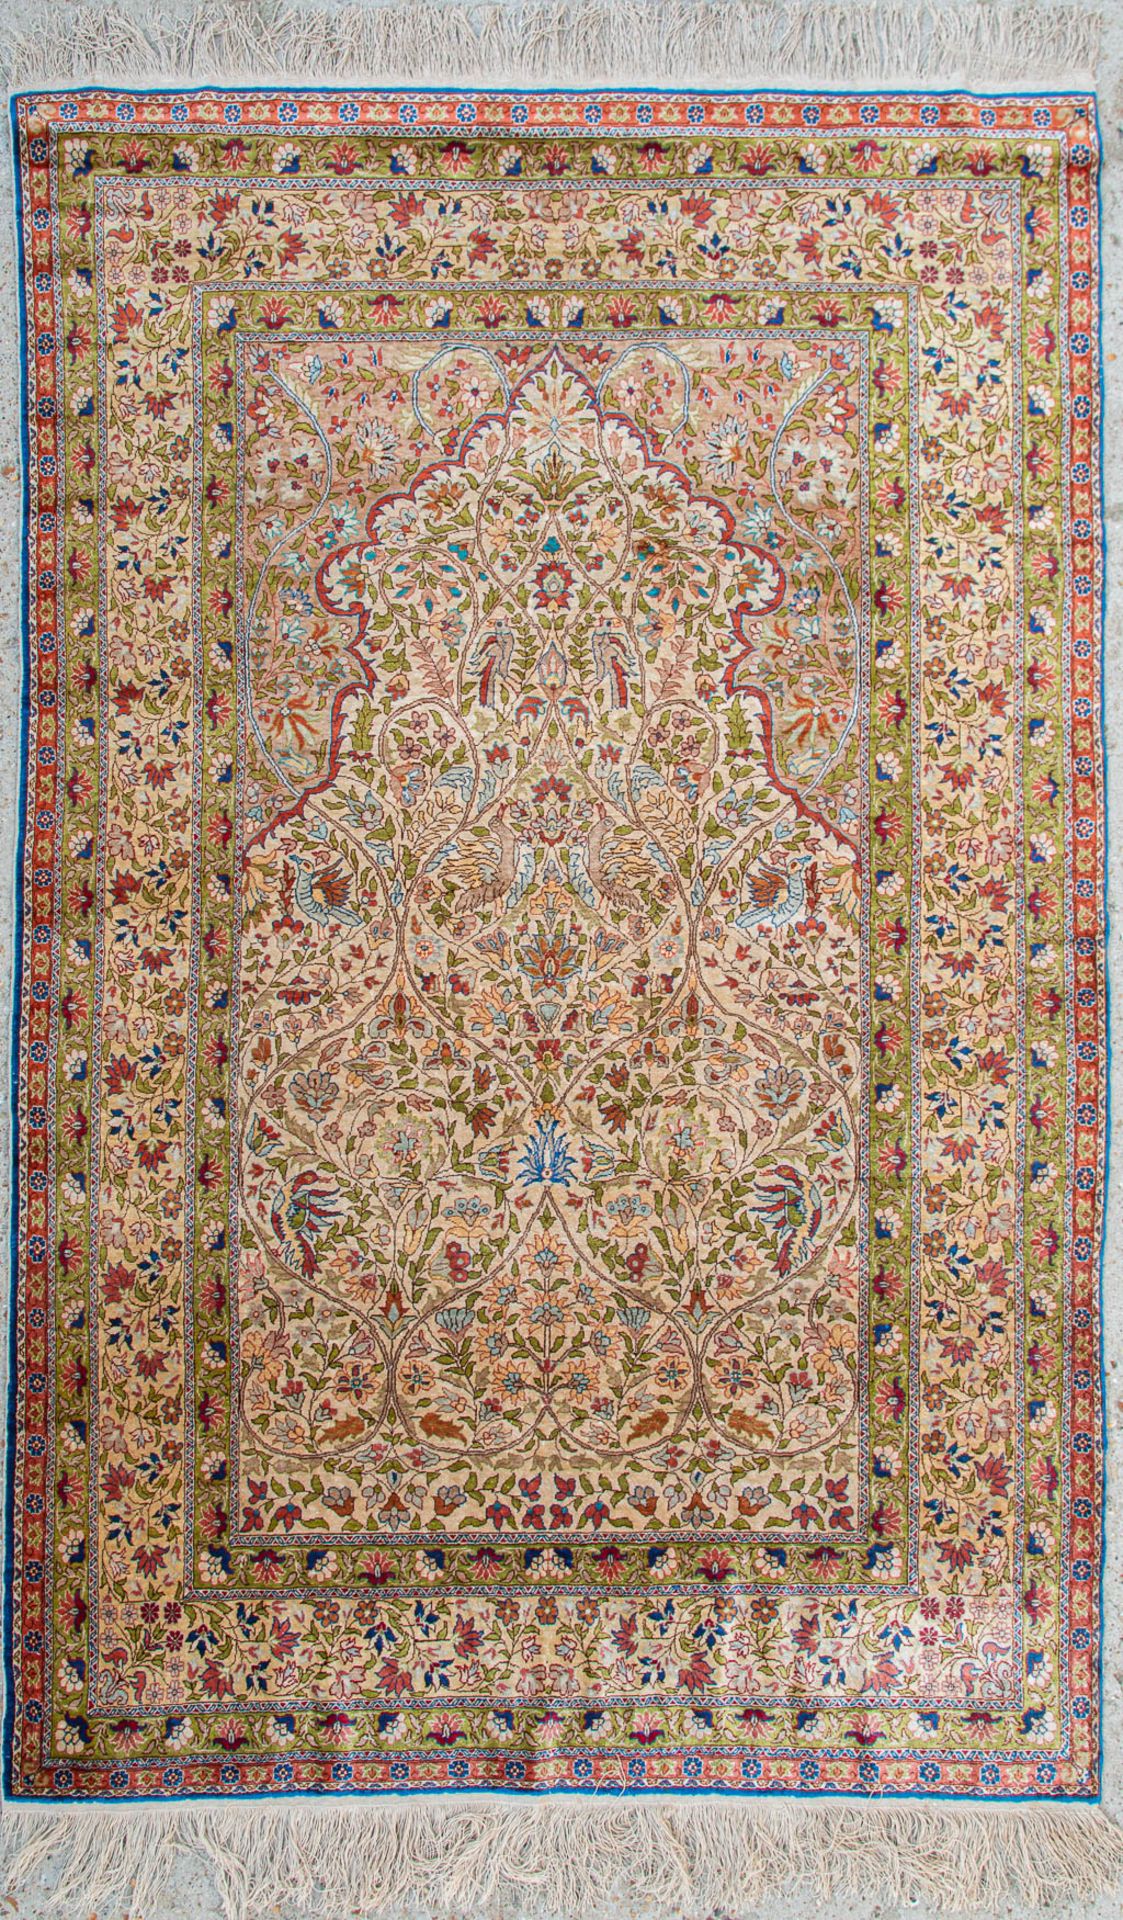 An Oriental hand-made carpet made of silk and marked Hereke (191 x 120) (120 x 190 cm)